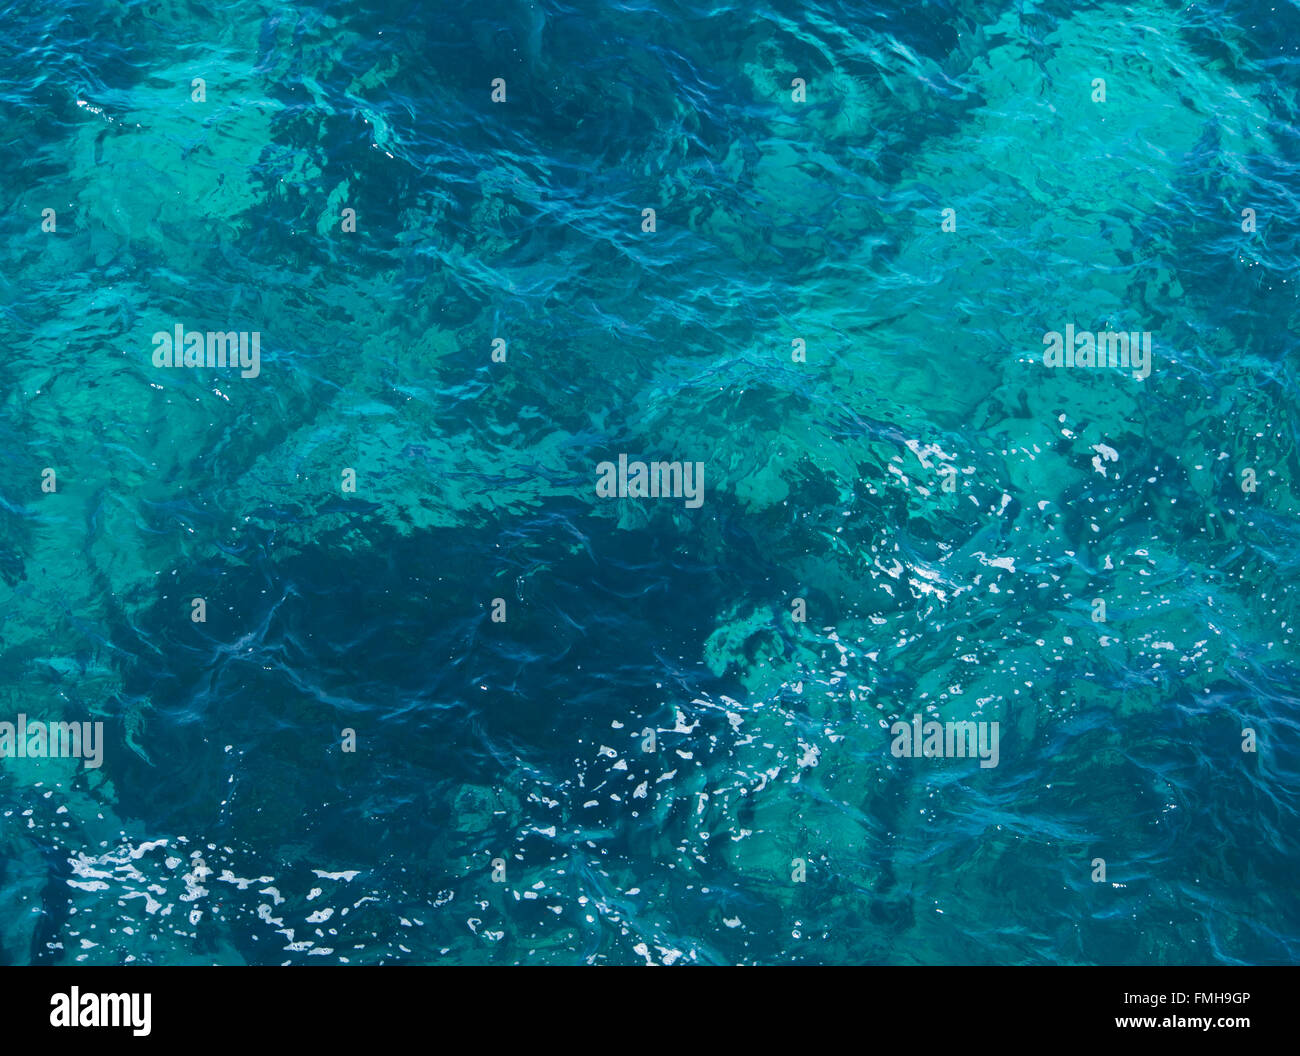 Shades of azure blue sea with ripples, right for a summer holiday mood Stock Photo